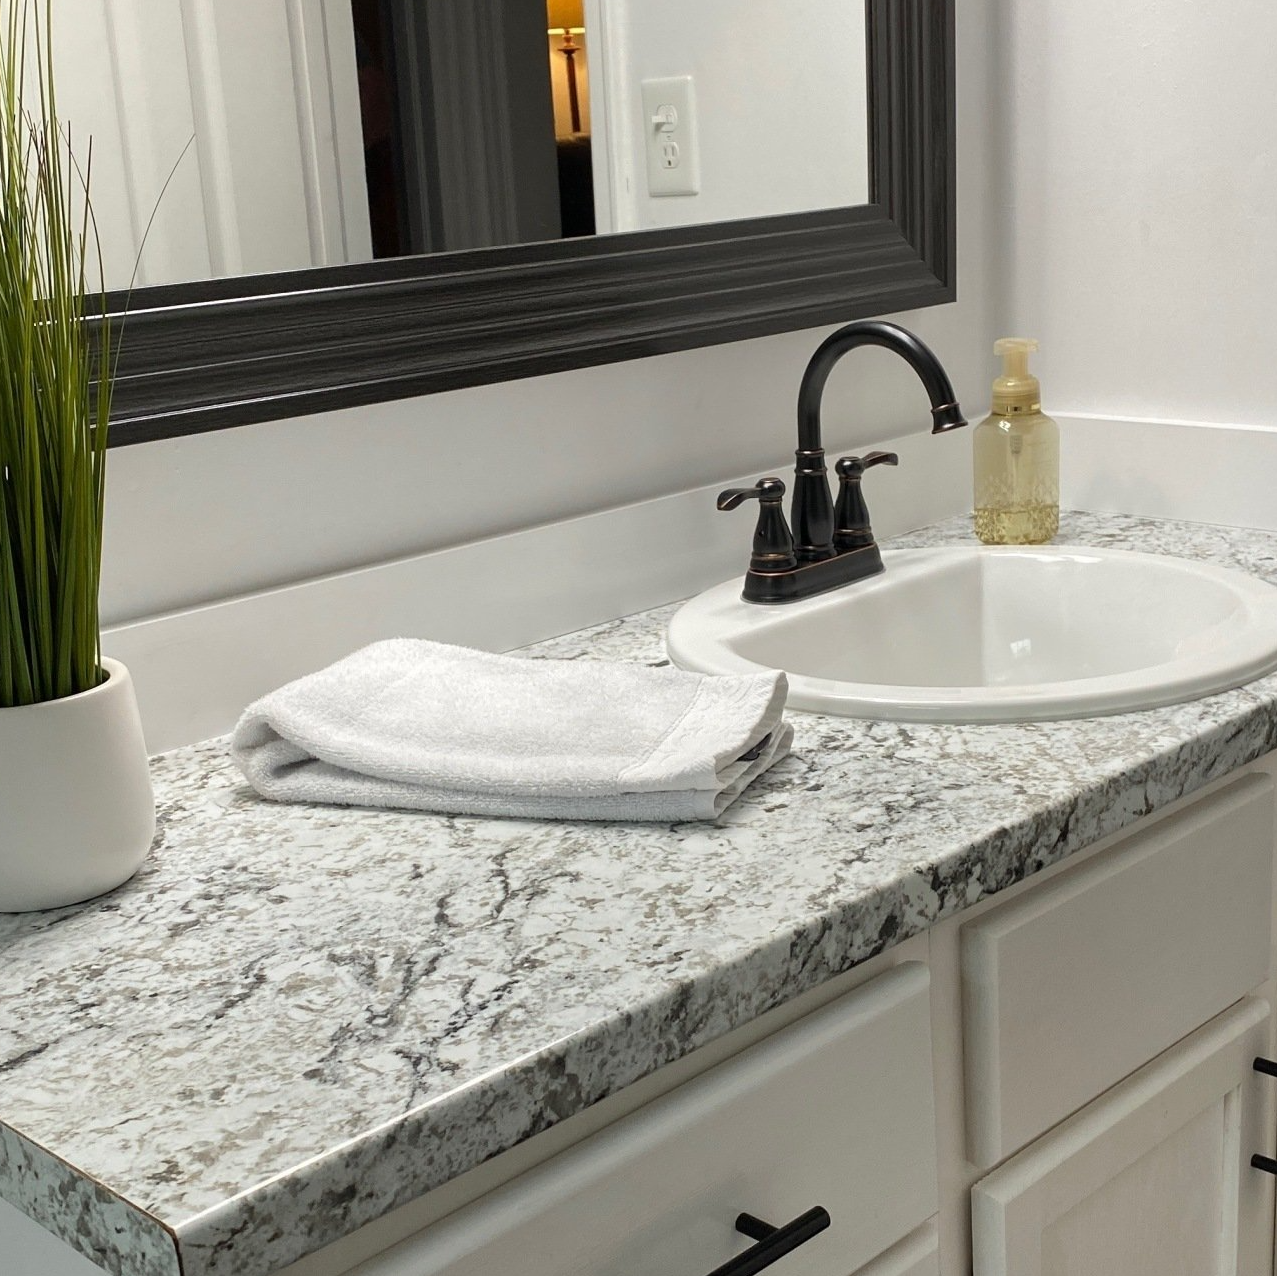 Bathroom sink, cabinet, mirror and counter top